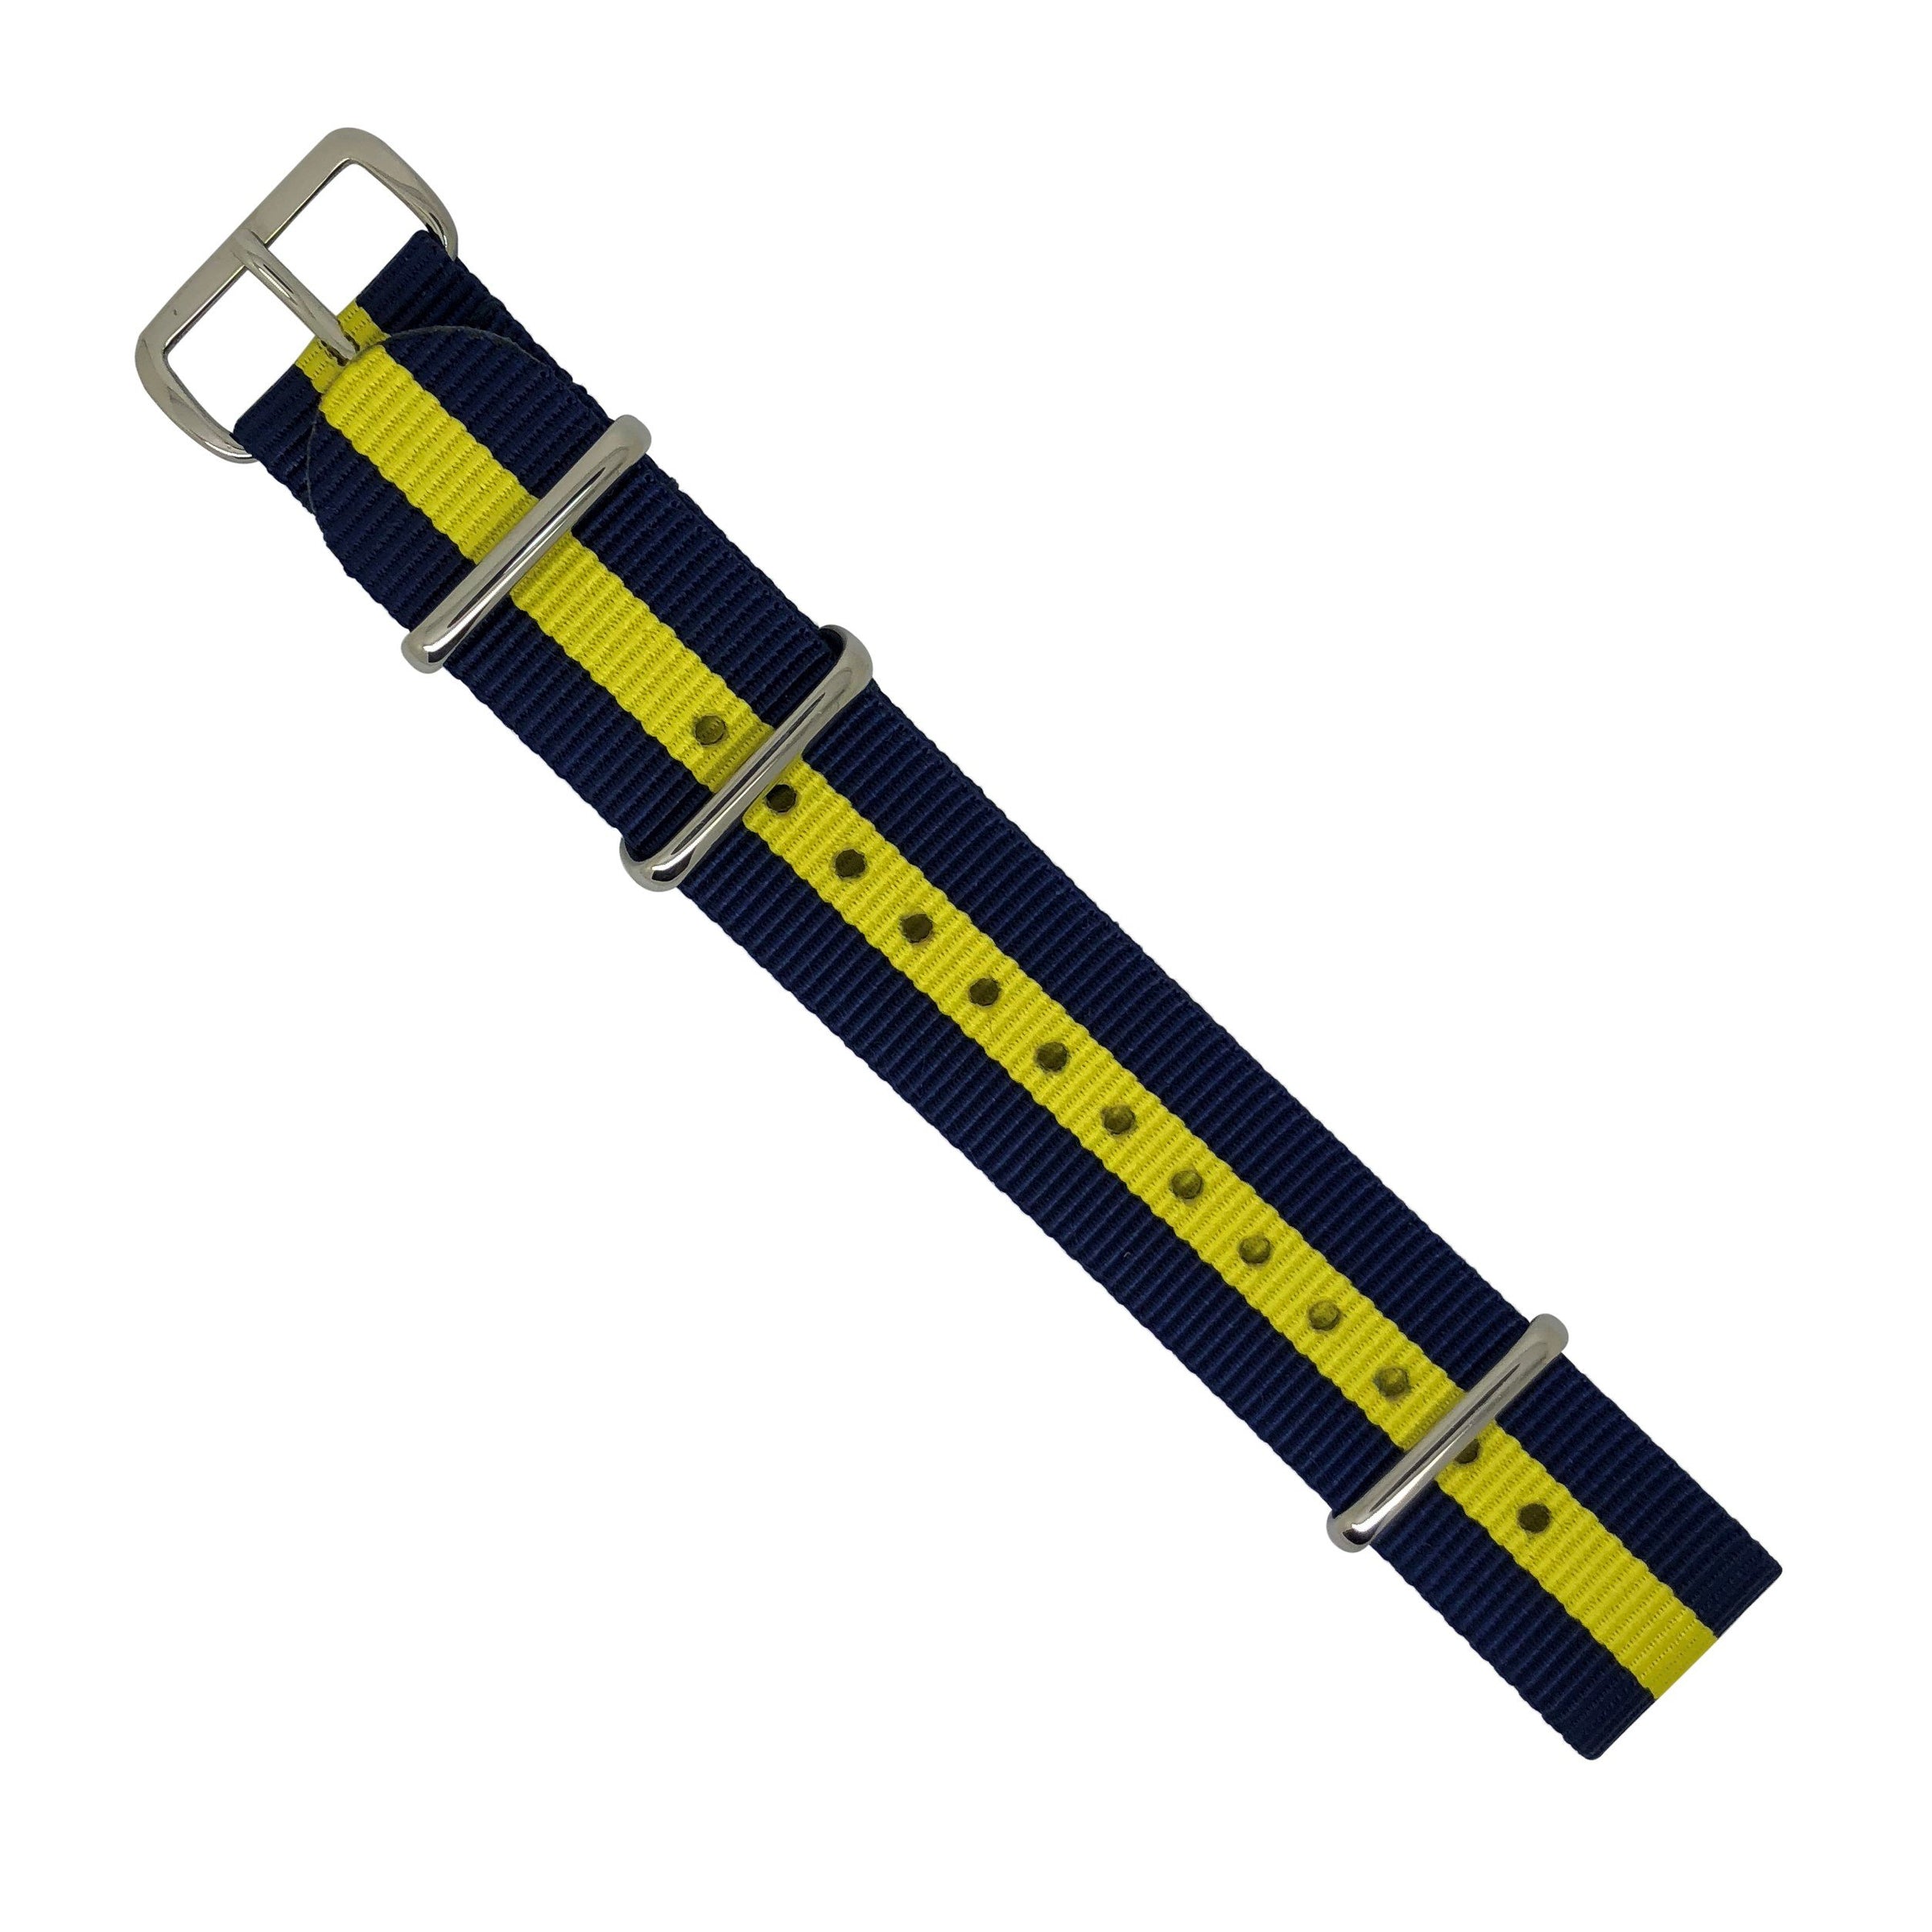 Premium Nato Strap in Navy Yellow with Polished Silver Buckle (20mm) - Nomad Watch Works Malaysia